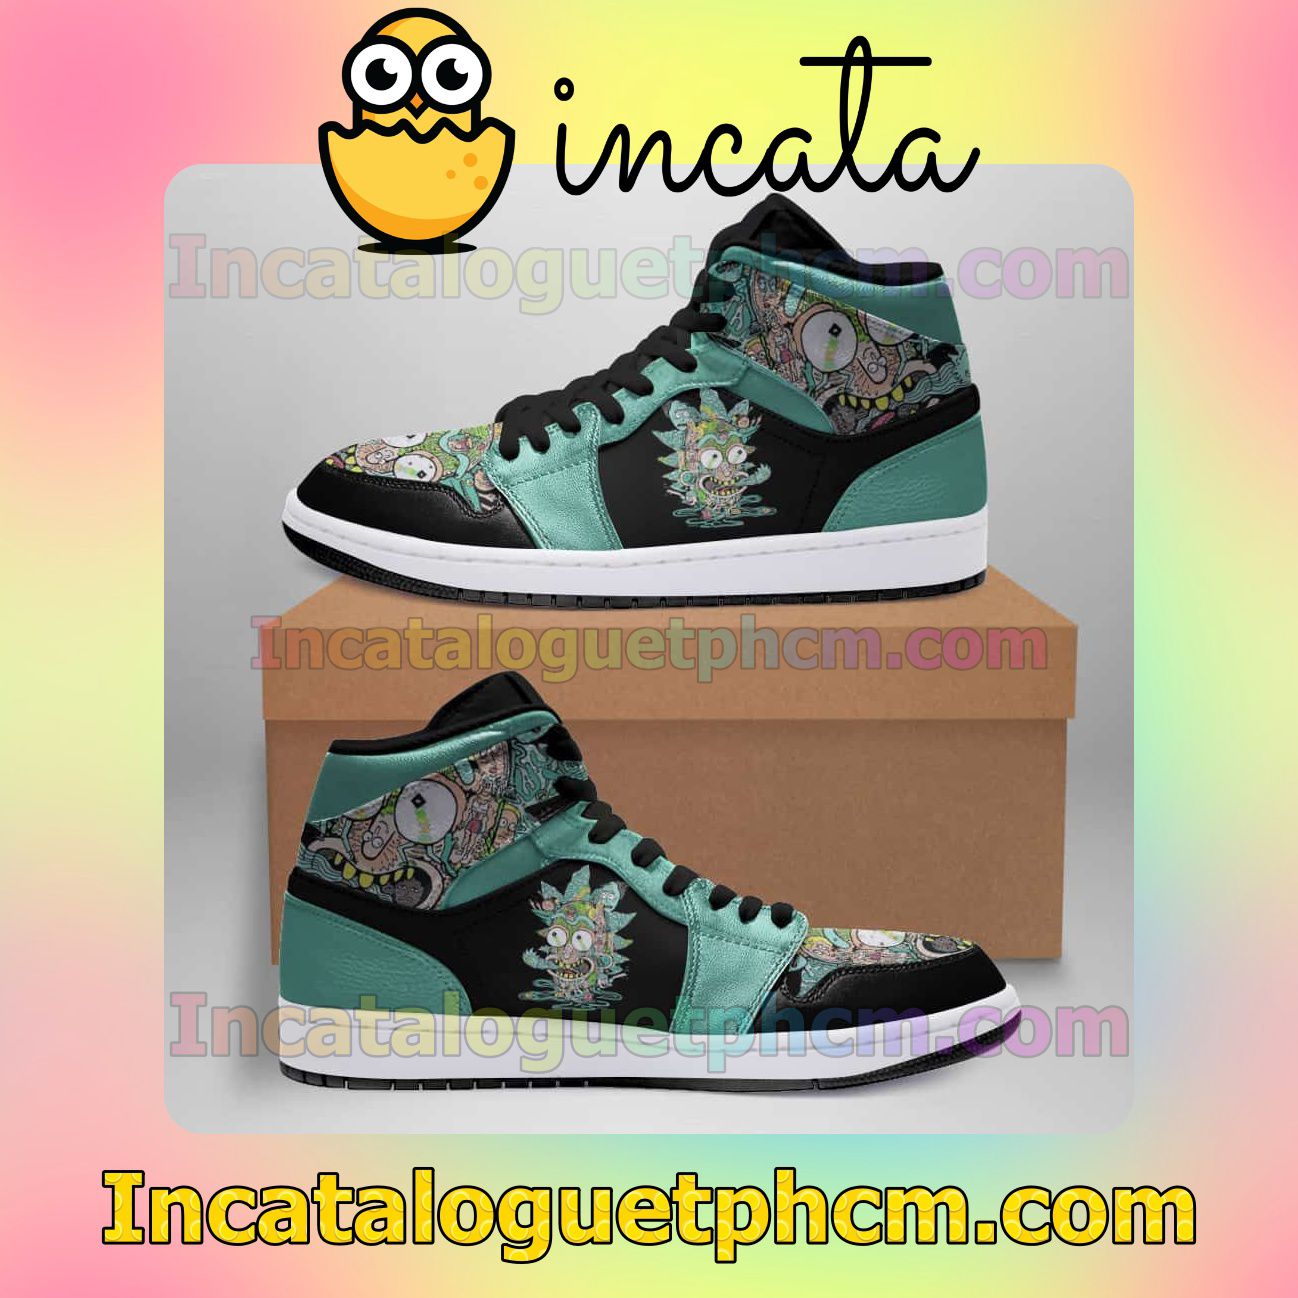 Teal Rick And Morty 1s Air Jordan 1 Inspired Shoes